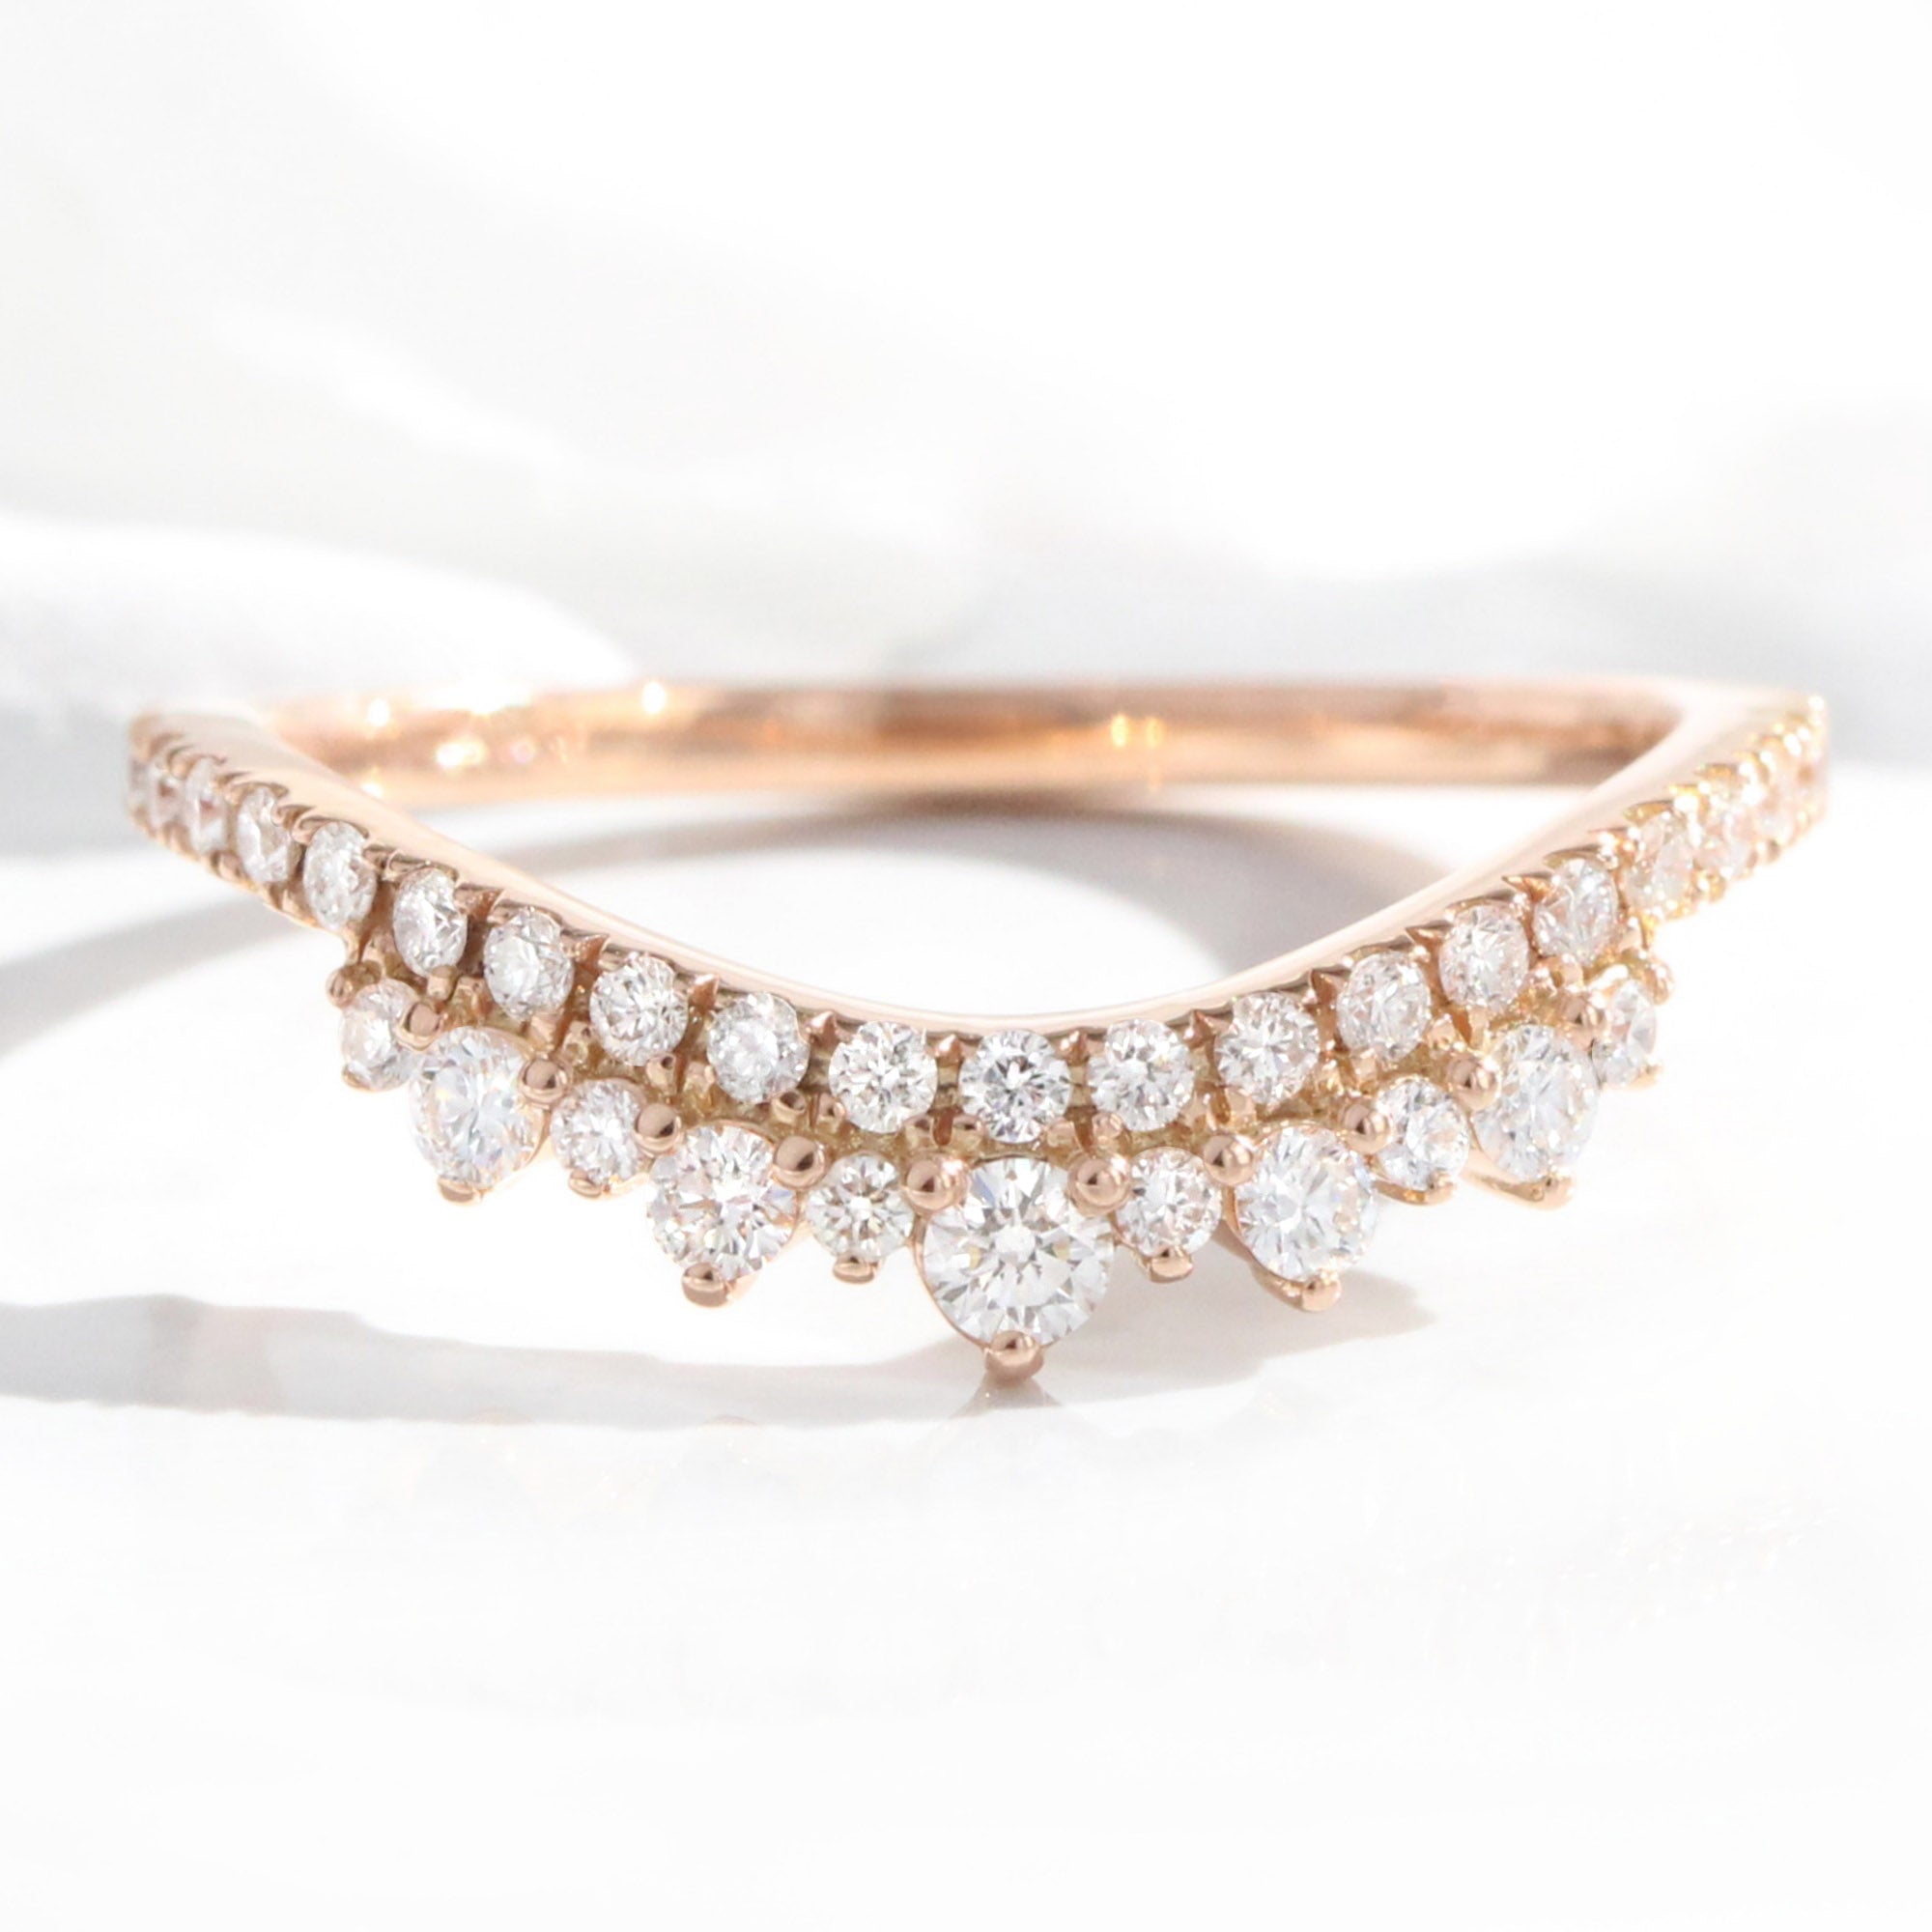 crown diamond wedding band rose gold curved wedding ring by la more design jewelry